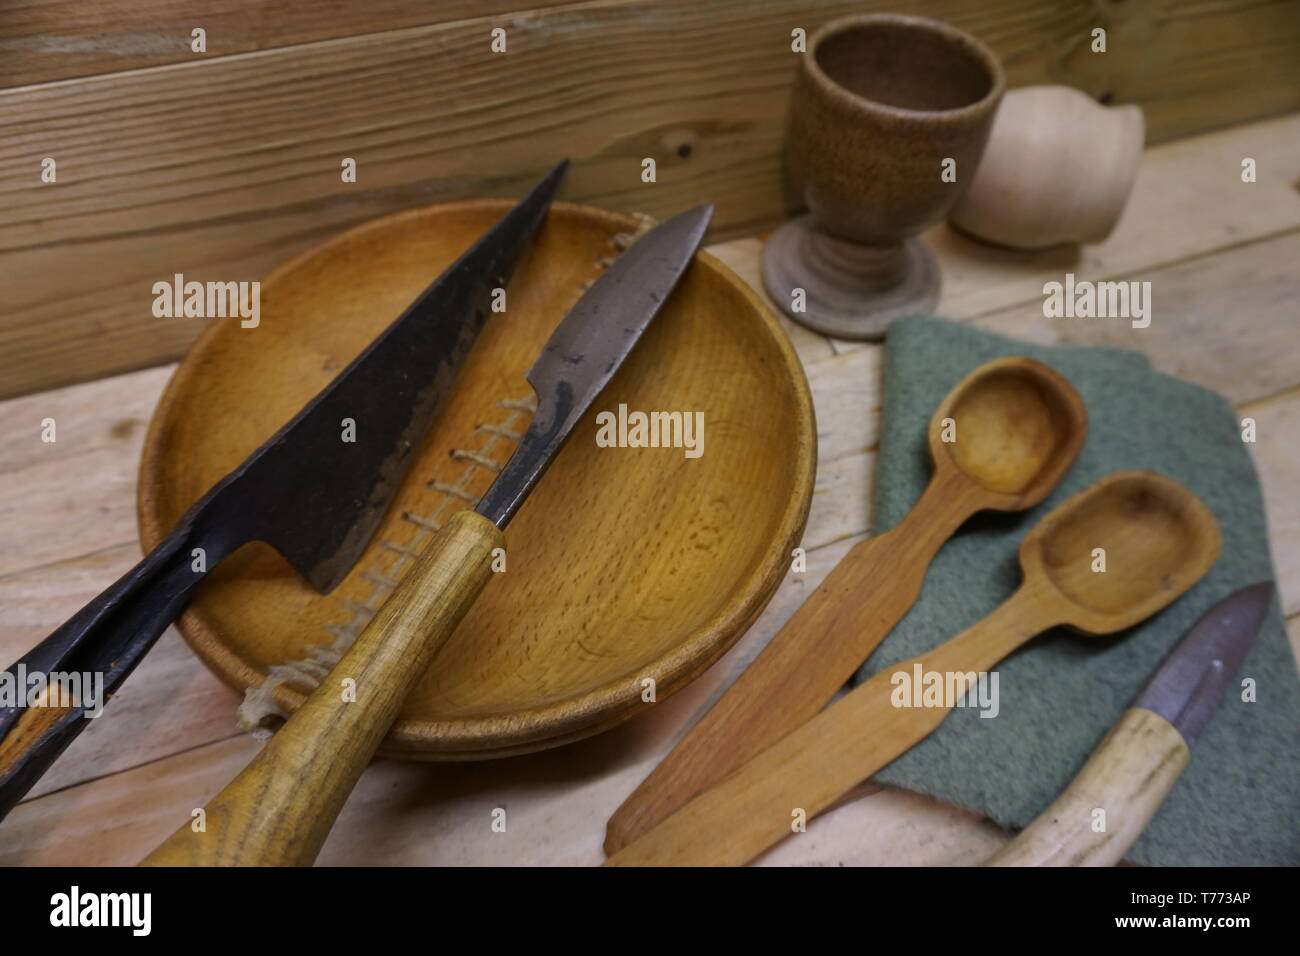 https://c8.alamy.com/comp/T773AP/anglo-saxon-viking-and-medieval-eating-utensils-reconstruction-by-daegrad-tools-T773AP.jpg